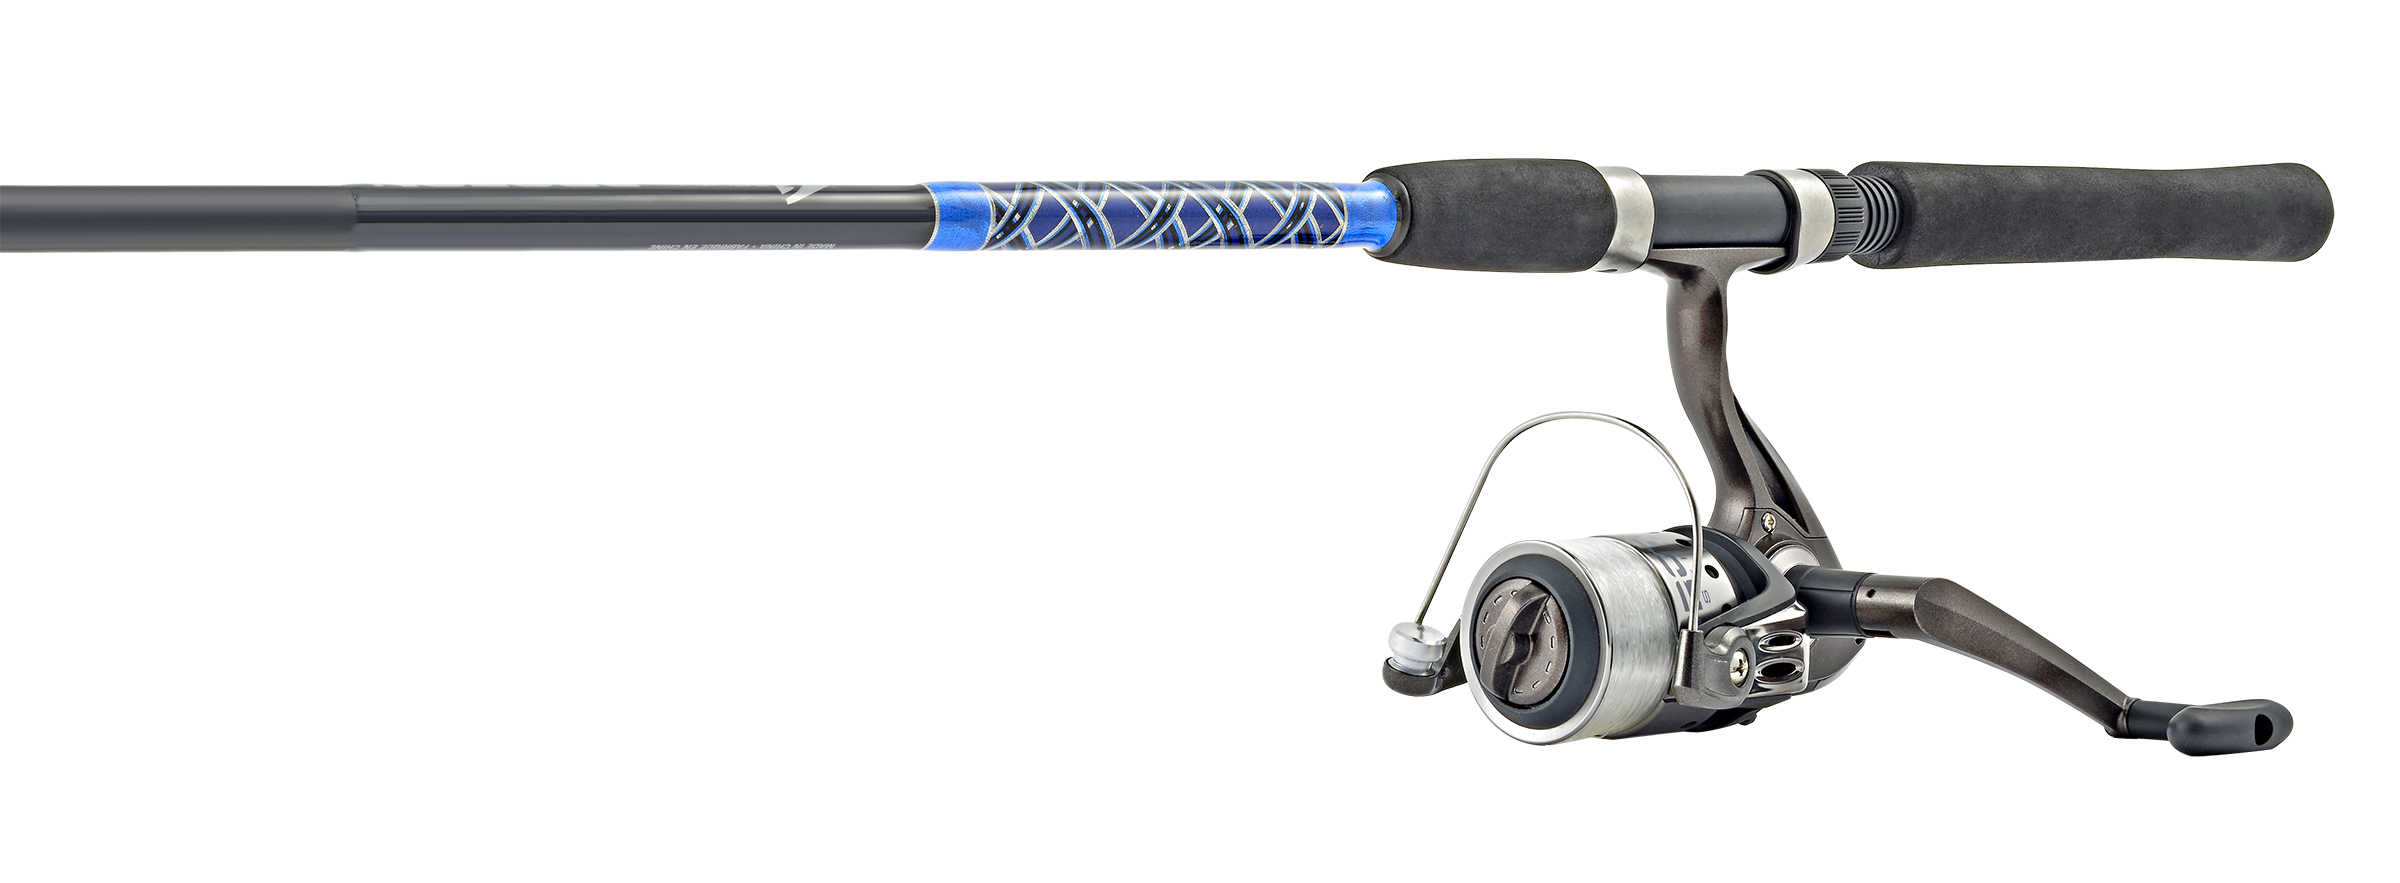 https://cs1.0ps.us/original/opplanet-south-bend-proton-spinning-rod-and-reel-combo-6-111072-main